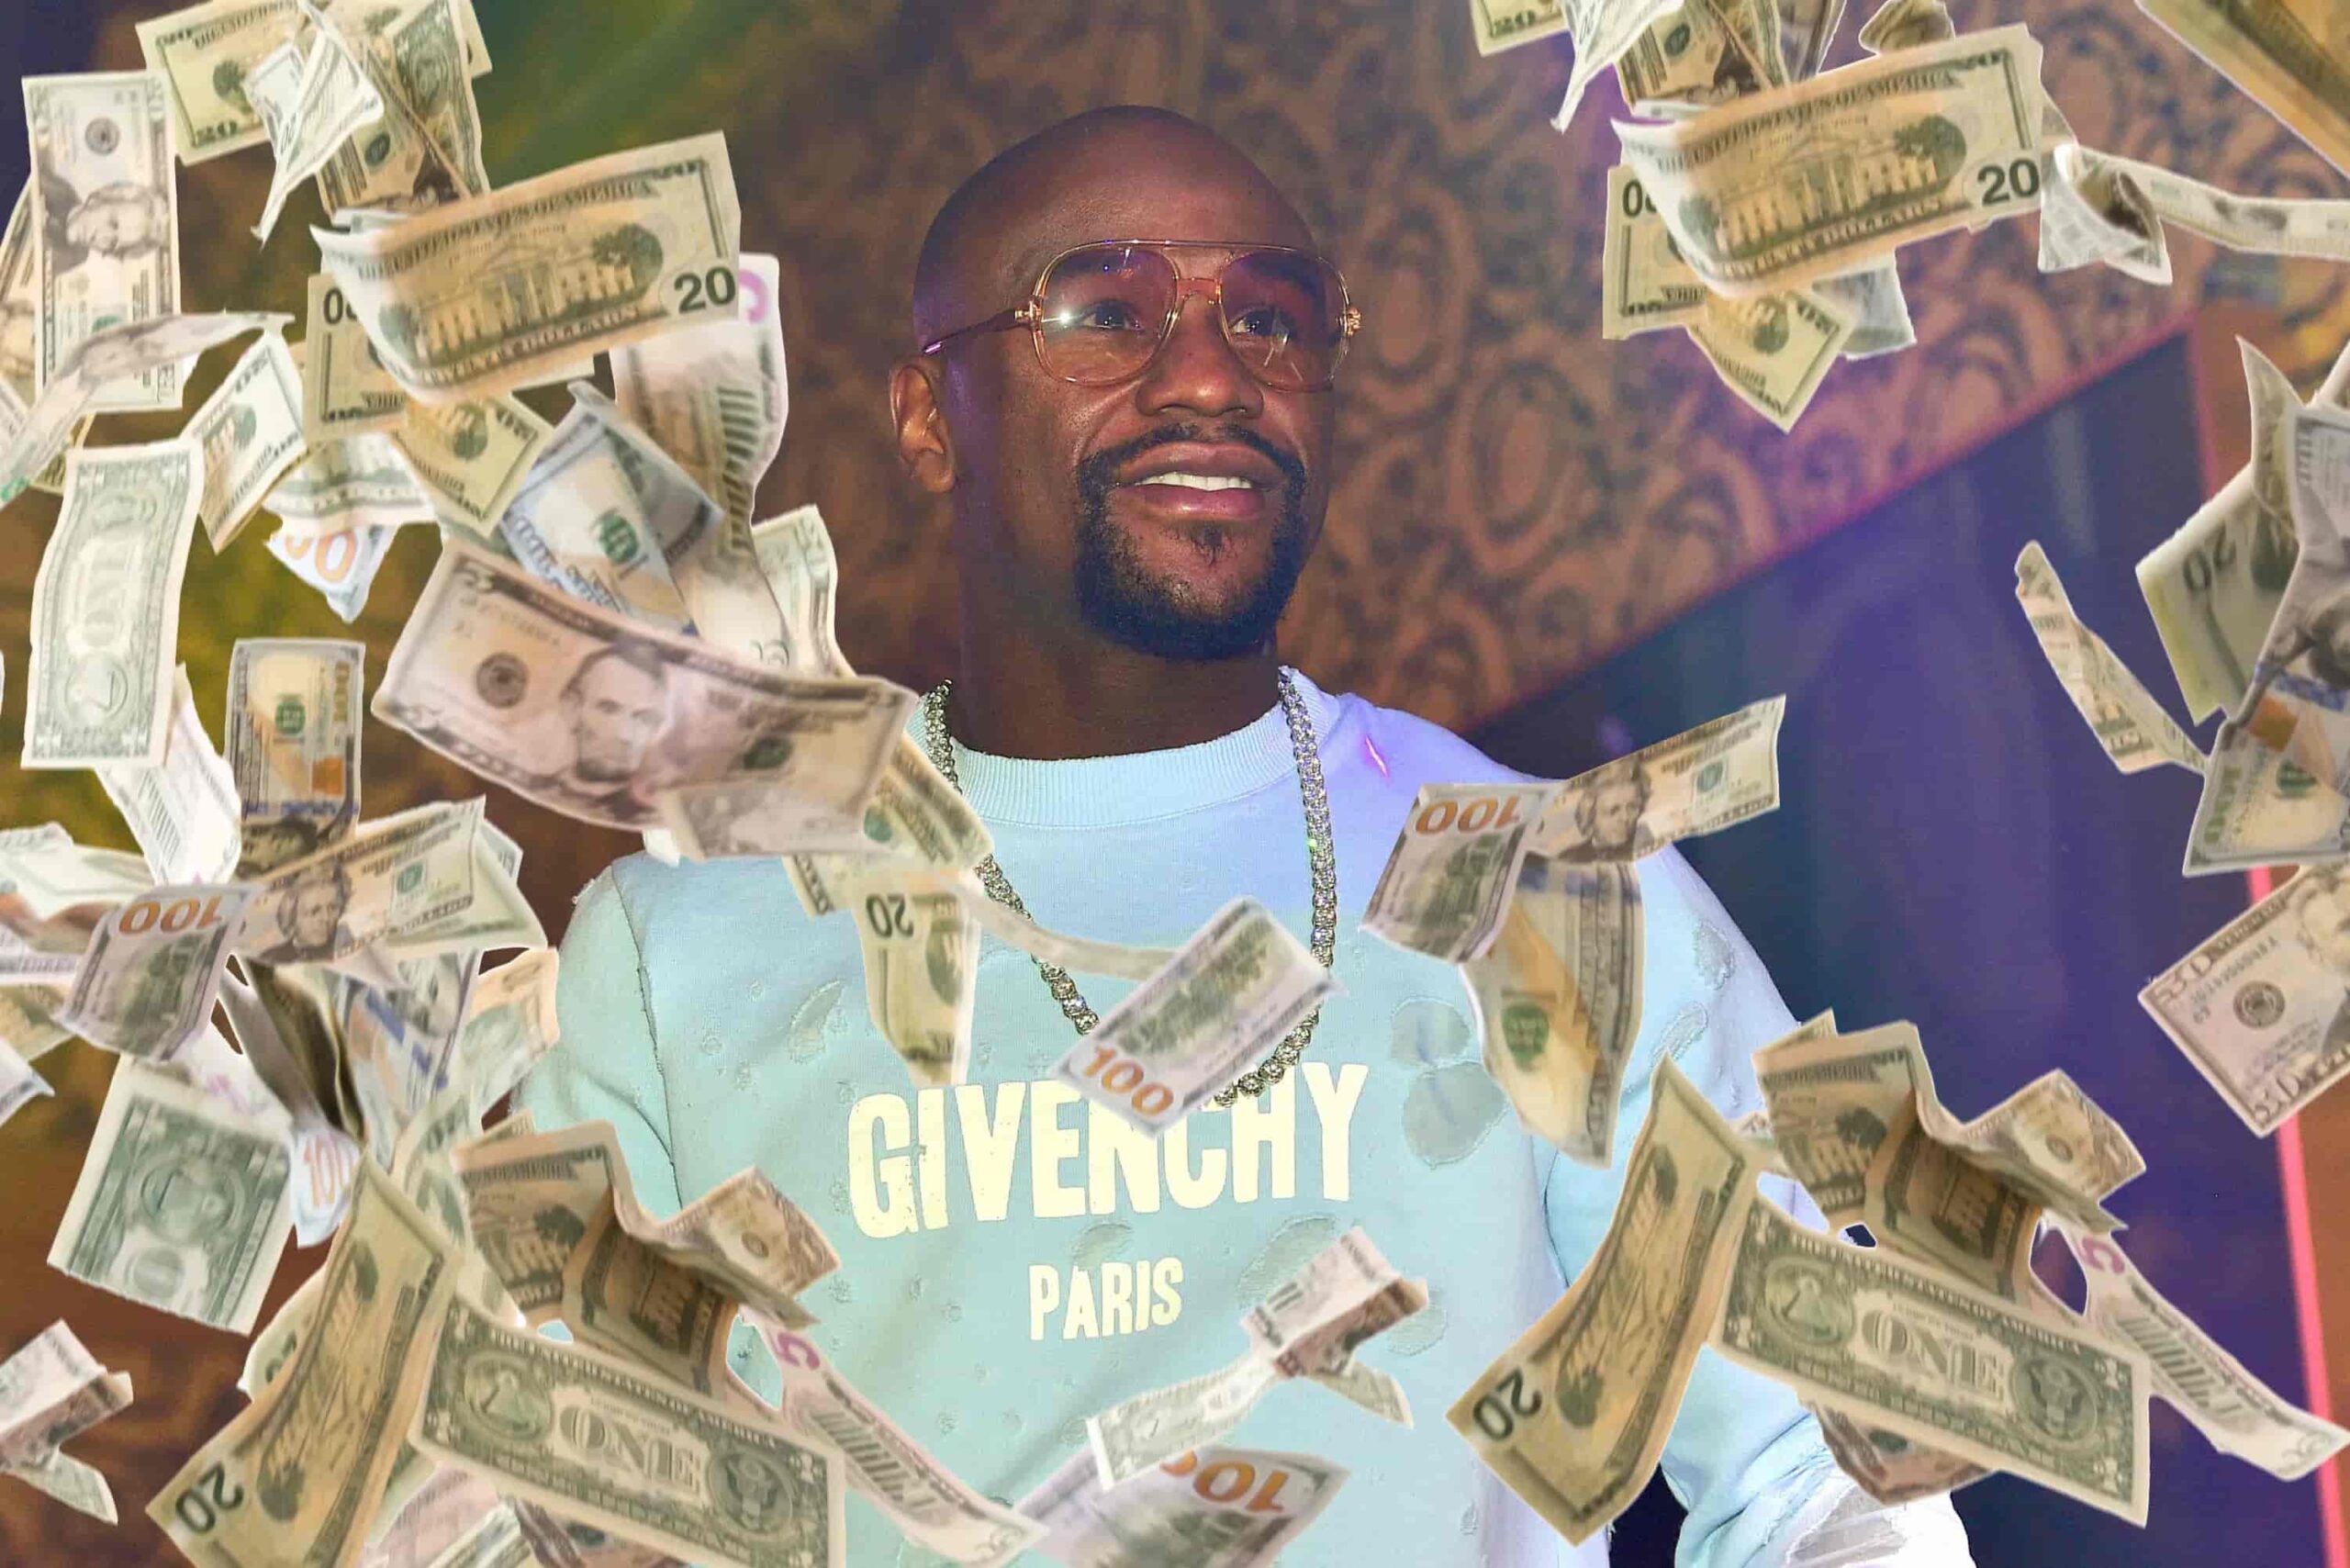 Floyd Mayweather got brutually roasted for flexing his money